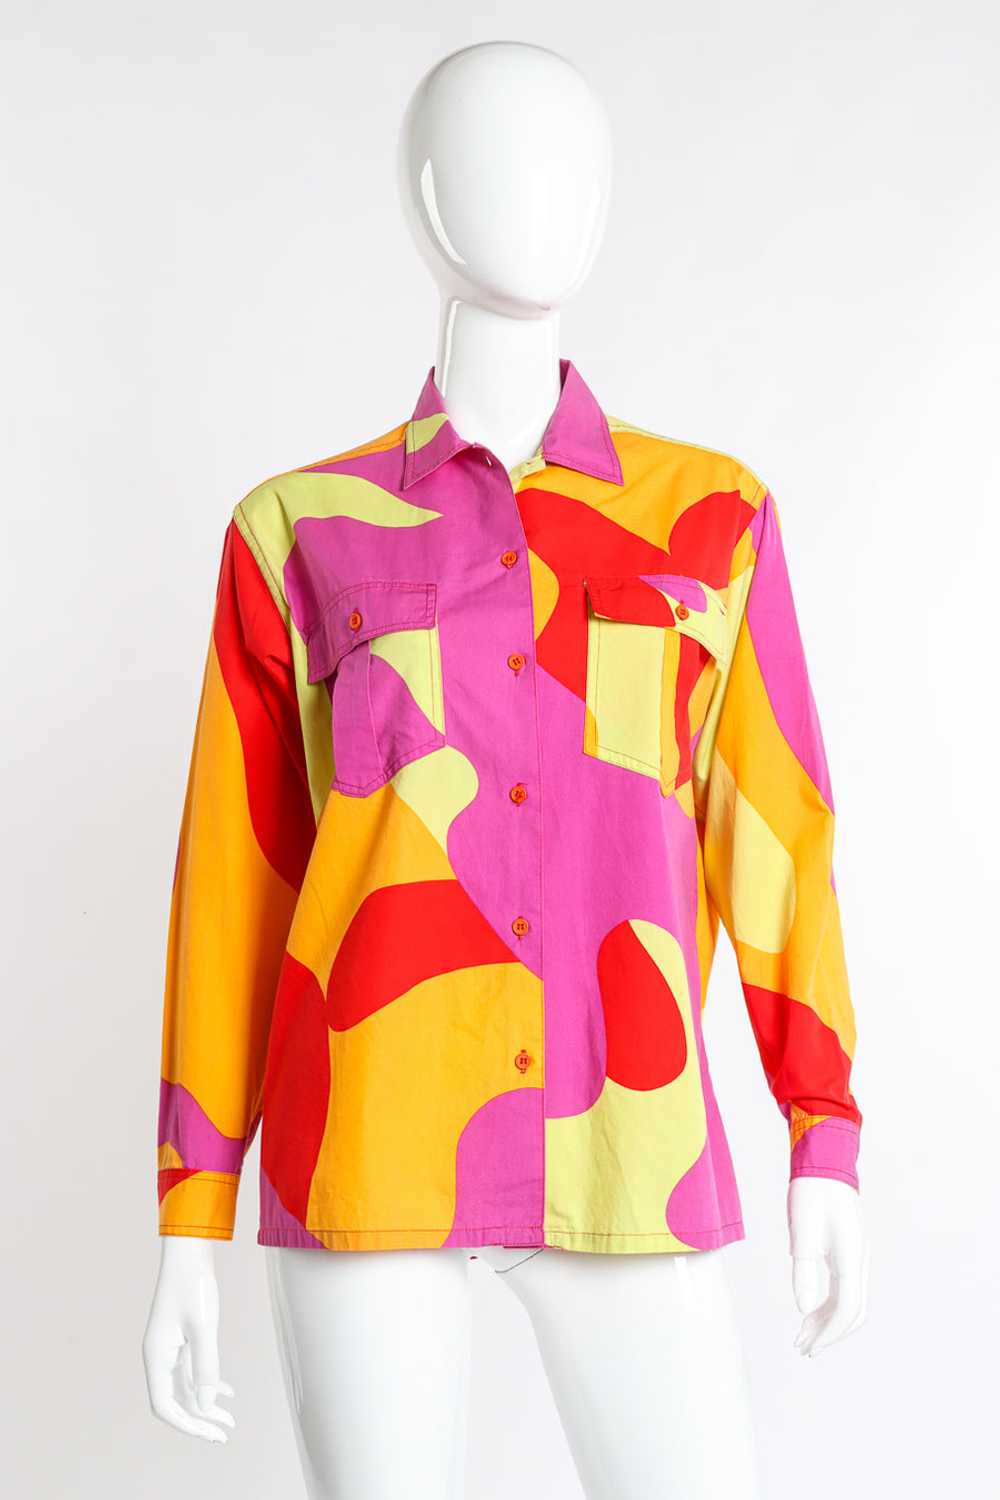 STEPHEN SPROUSE Andy Warhol Camouflage Button Up - image 1